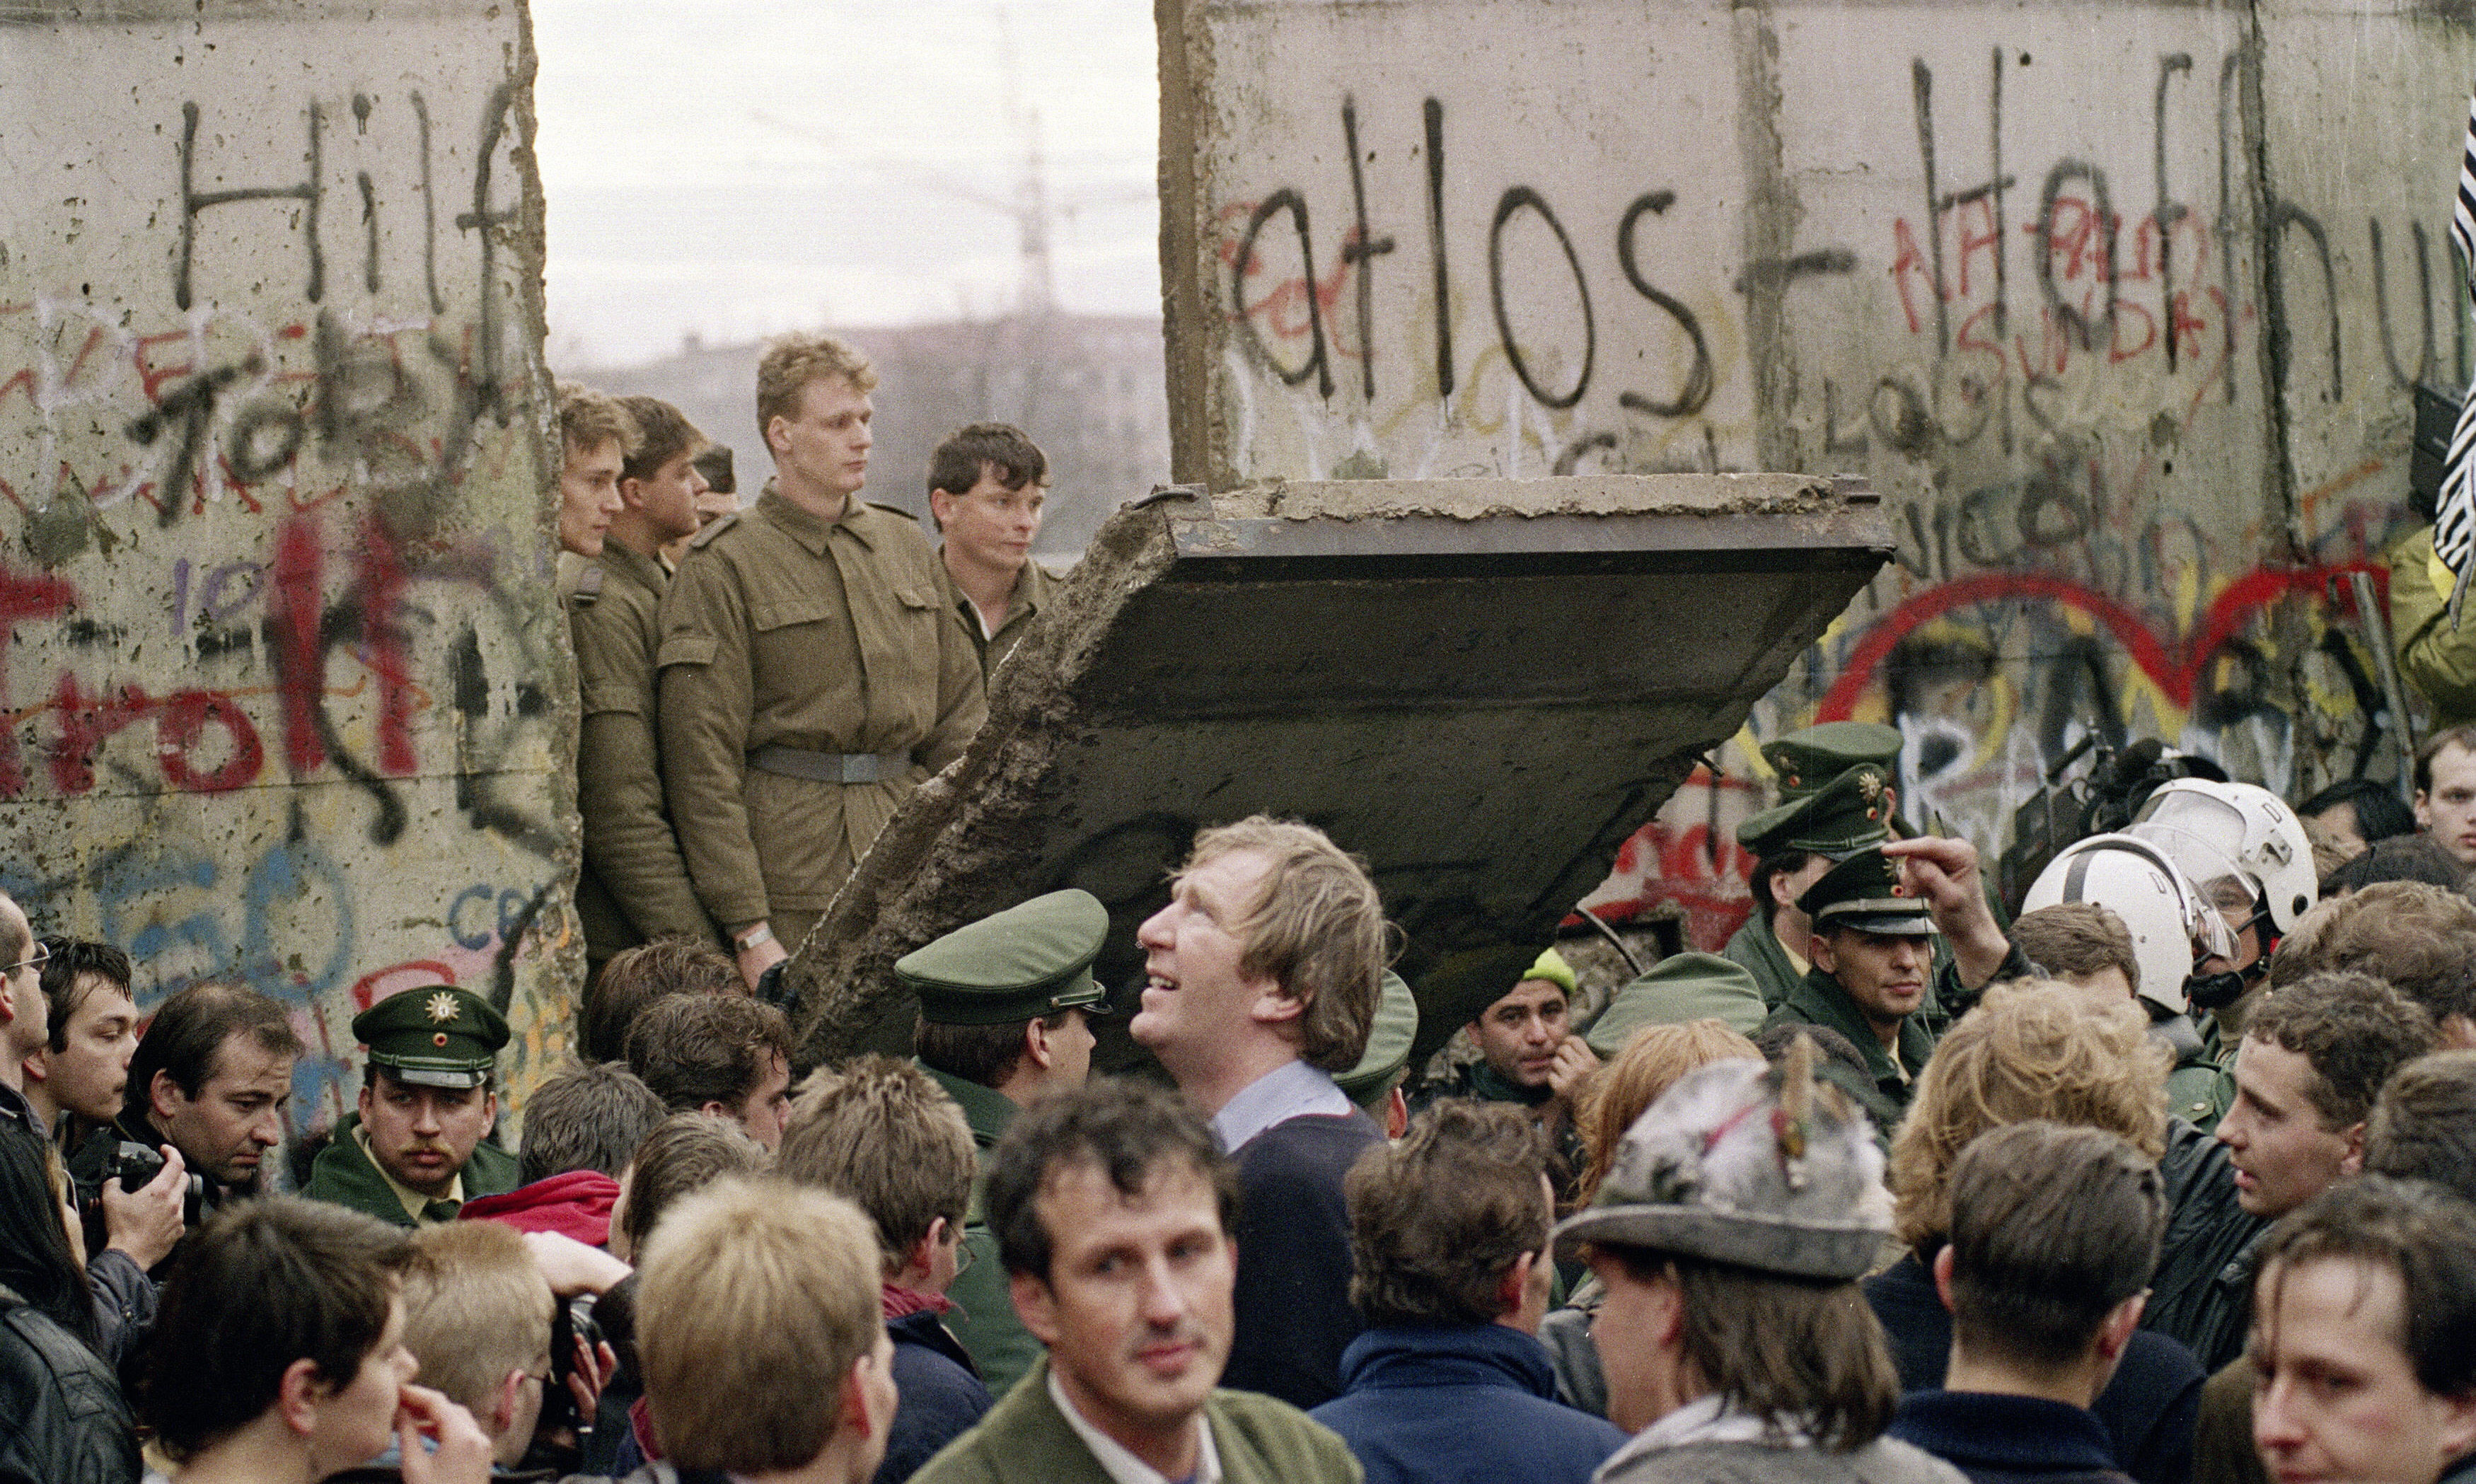 West Berliners crowd in front of the Berlin Wall early November 11 1989 as they watch East German border guards demolishing a section of the wall in order to open a new crossing point between East and West Berlin, near the Potsdamer Square.